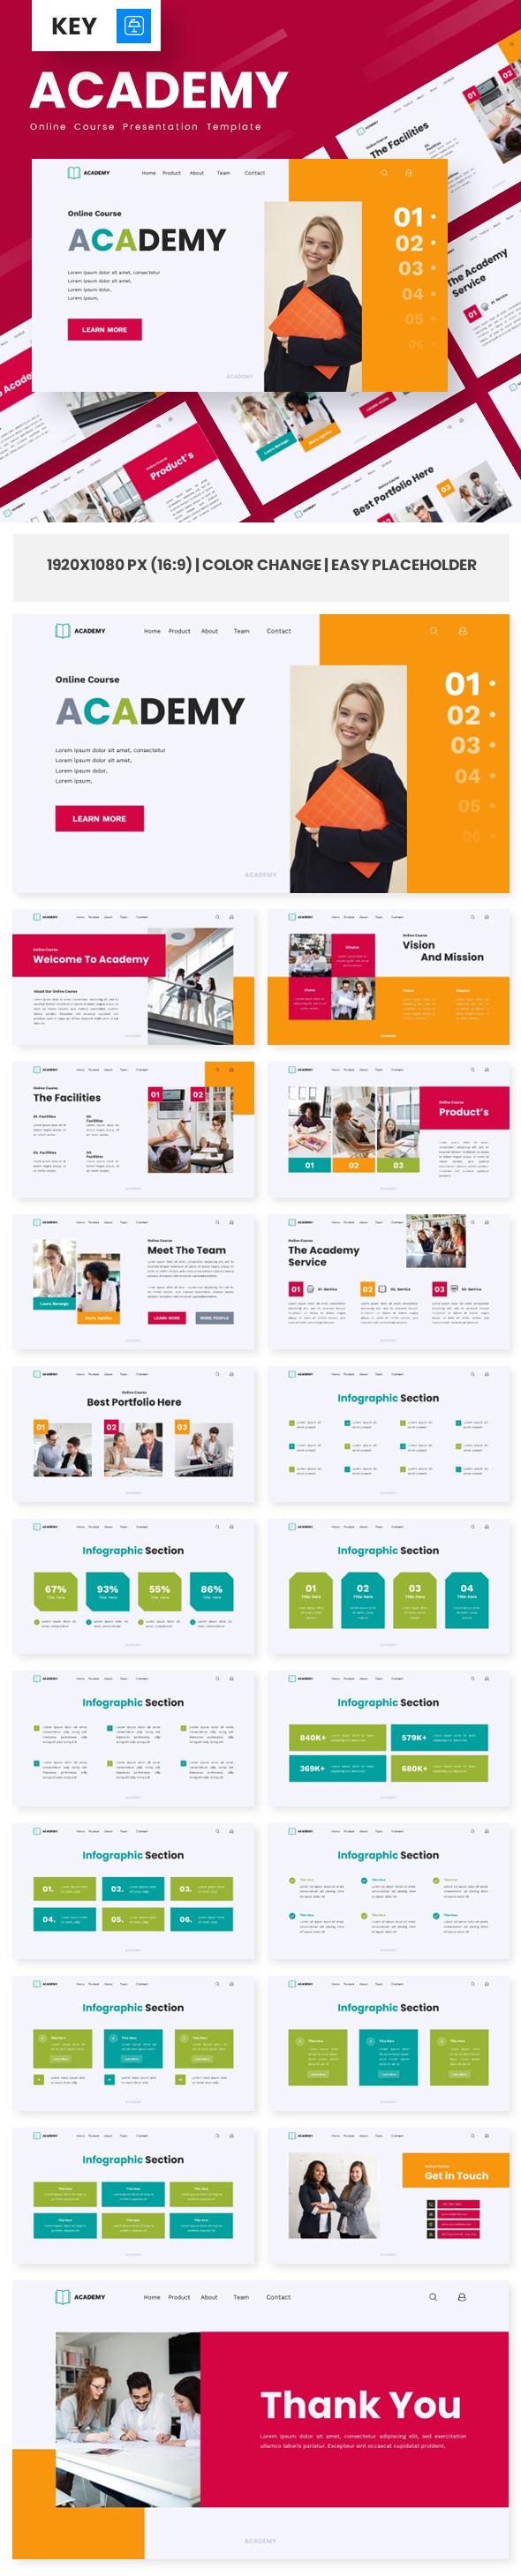 [DOWNLOAD]Academy - Online Course Keynote Templates